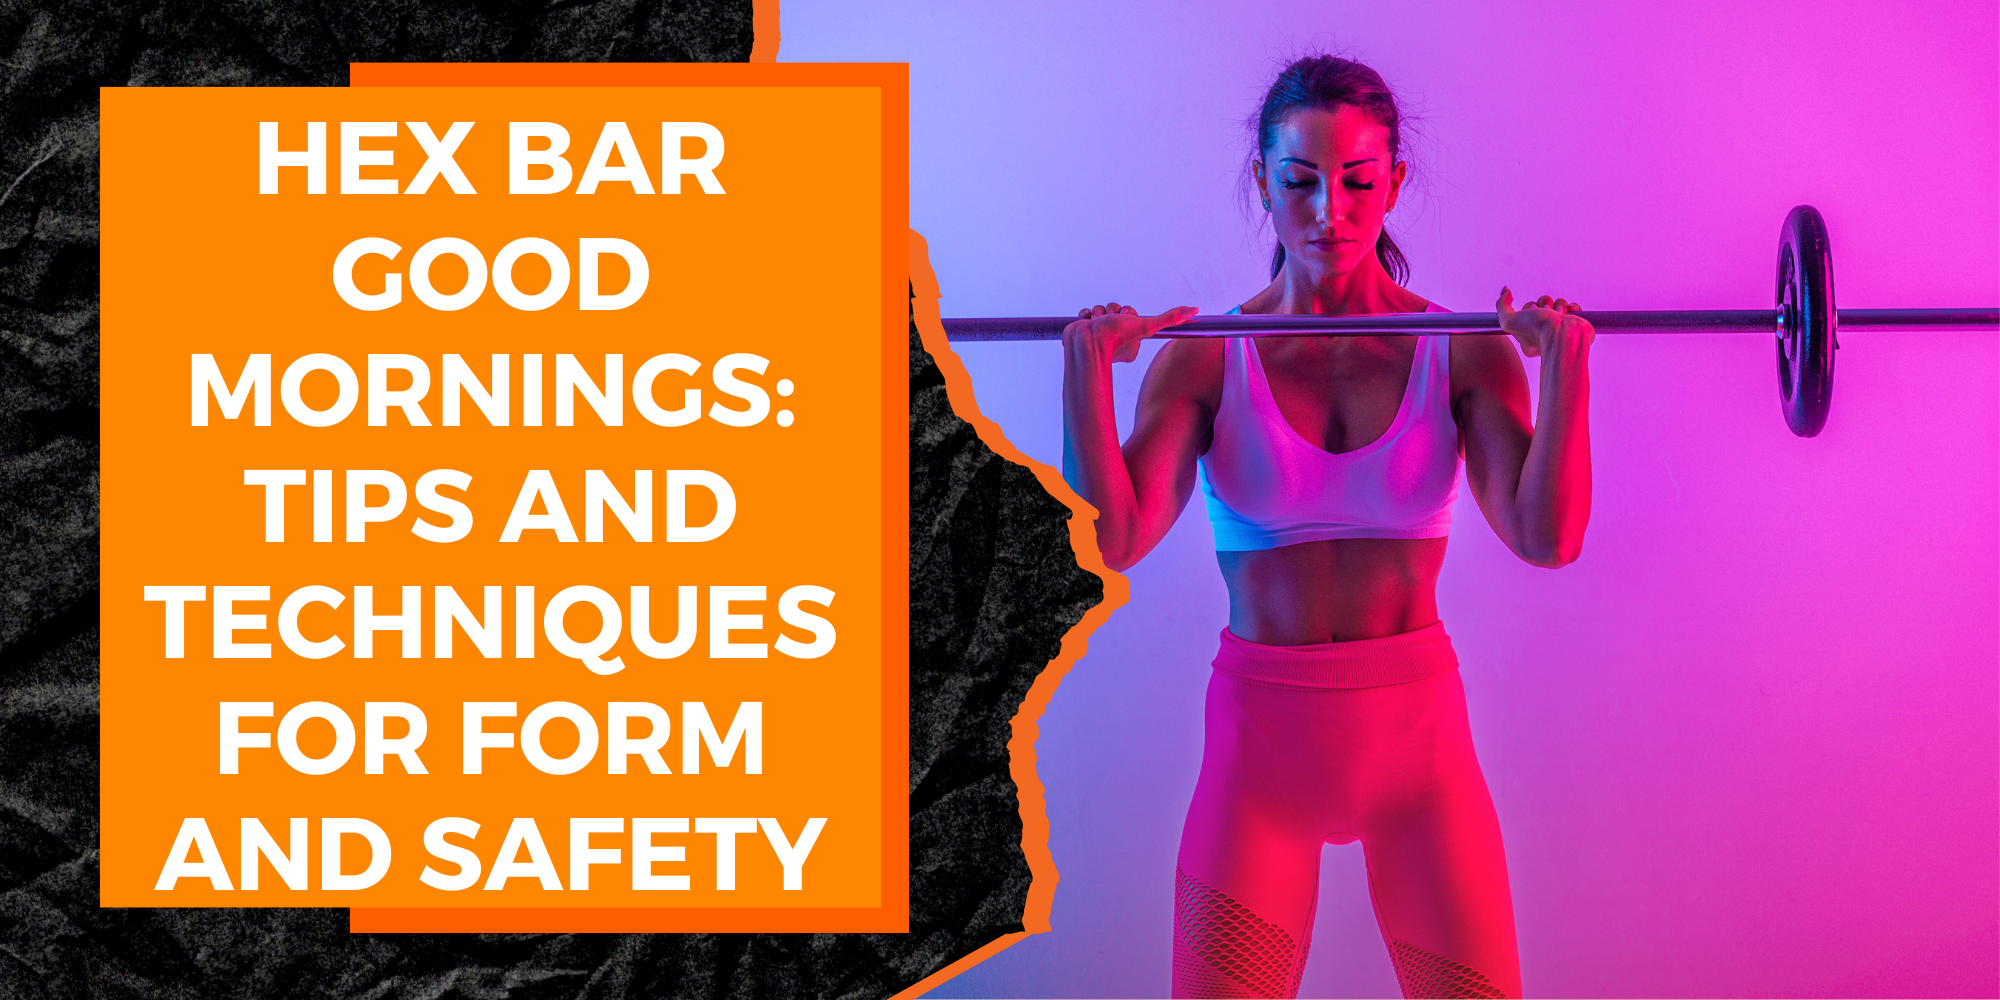 Hex Bar Good Mornings: Tips and Techniques for Form and Safety